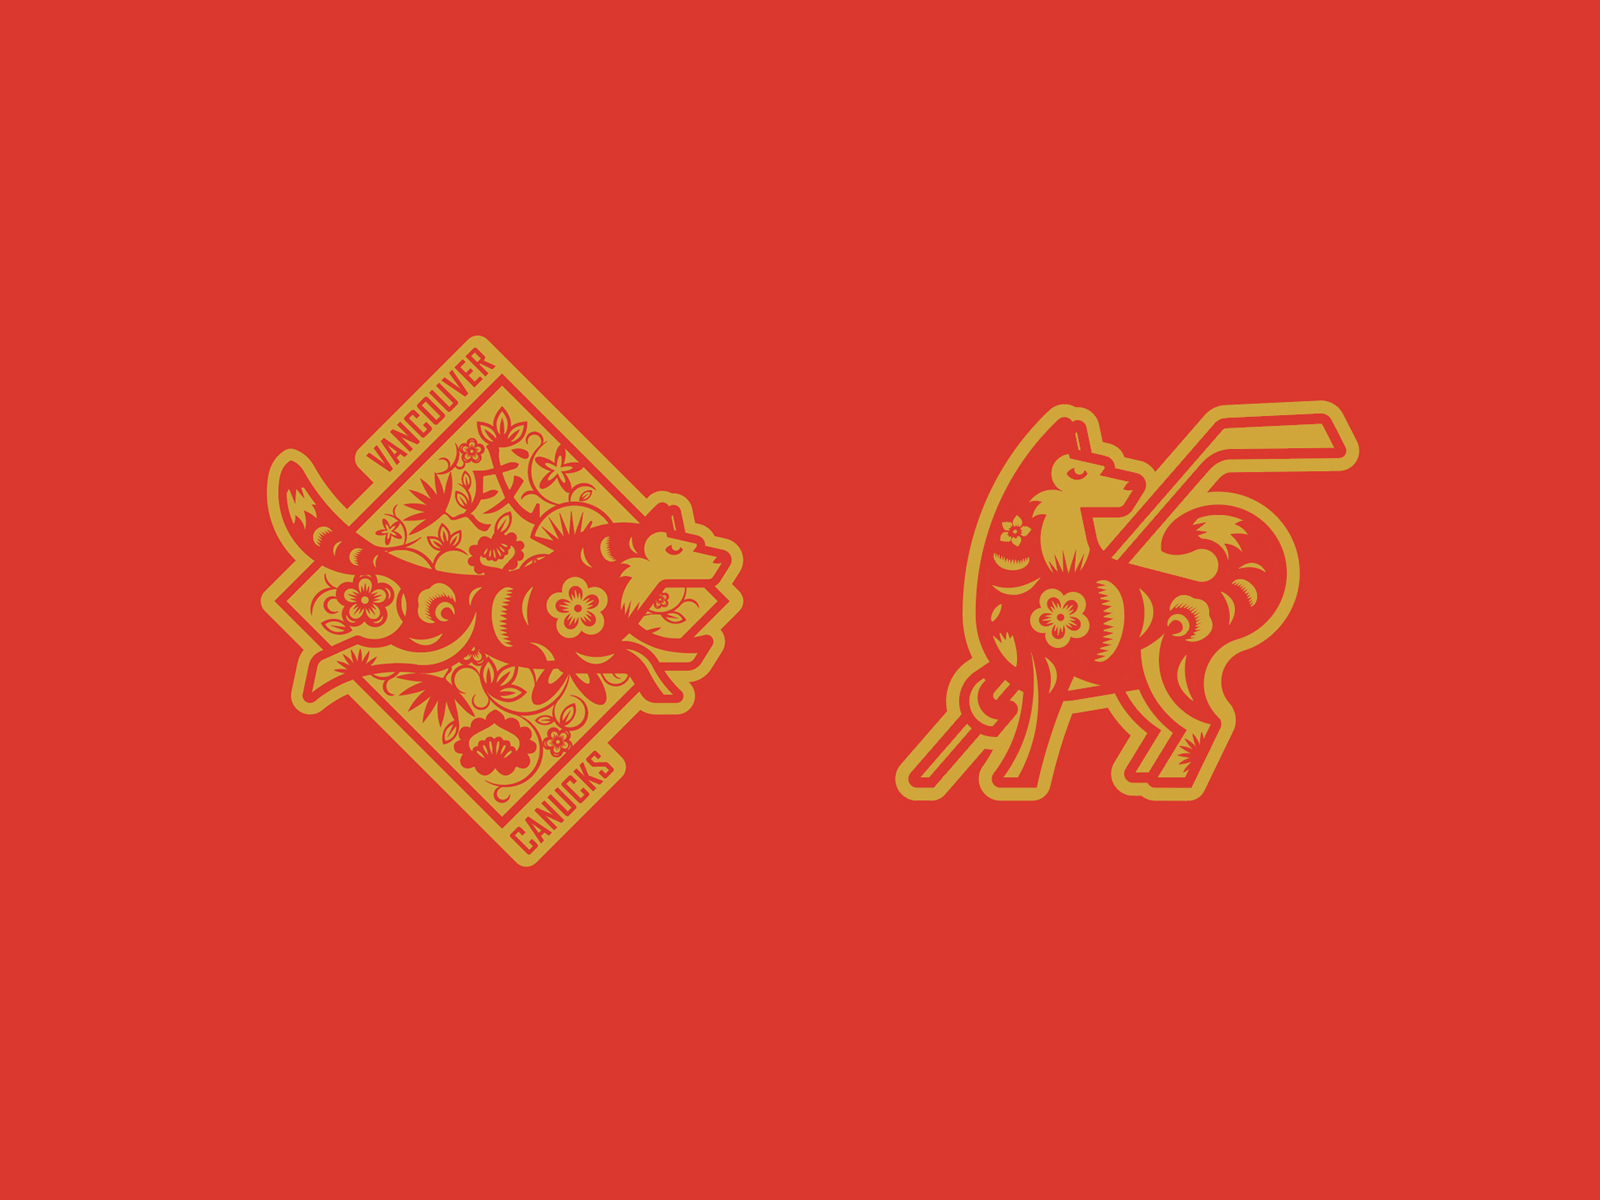 Canucks Lunar New Year Jersey Patches by Max Young on Dribbble